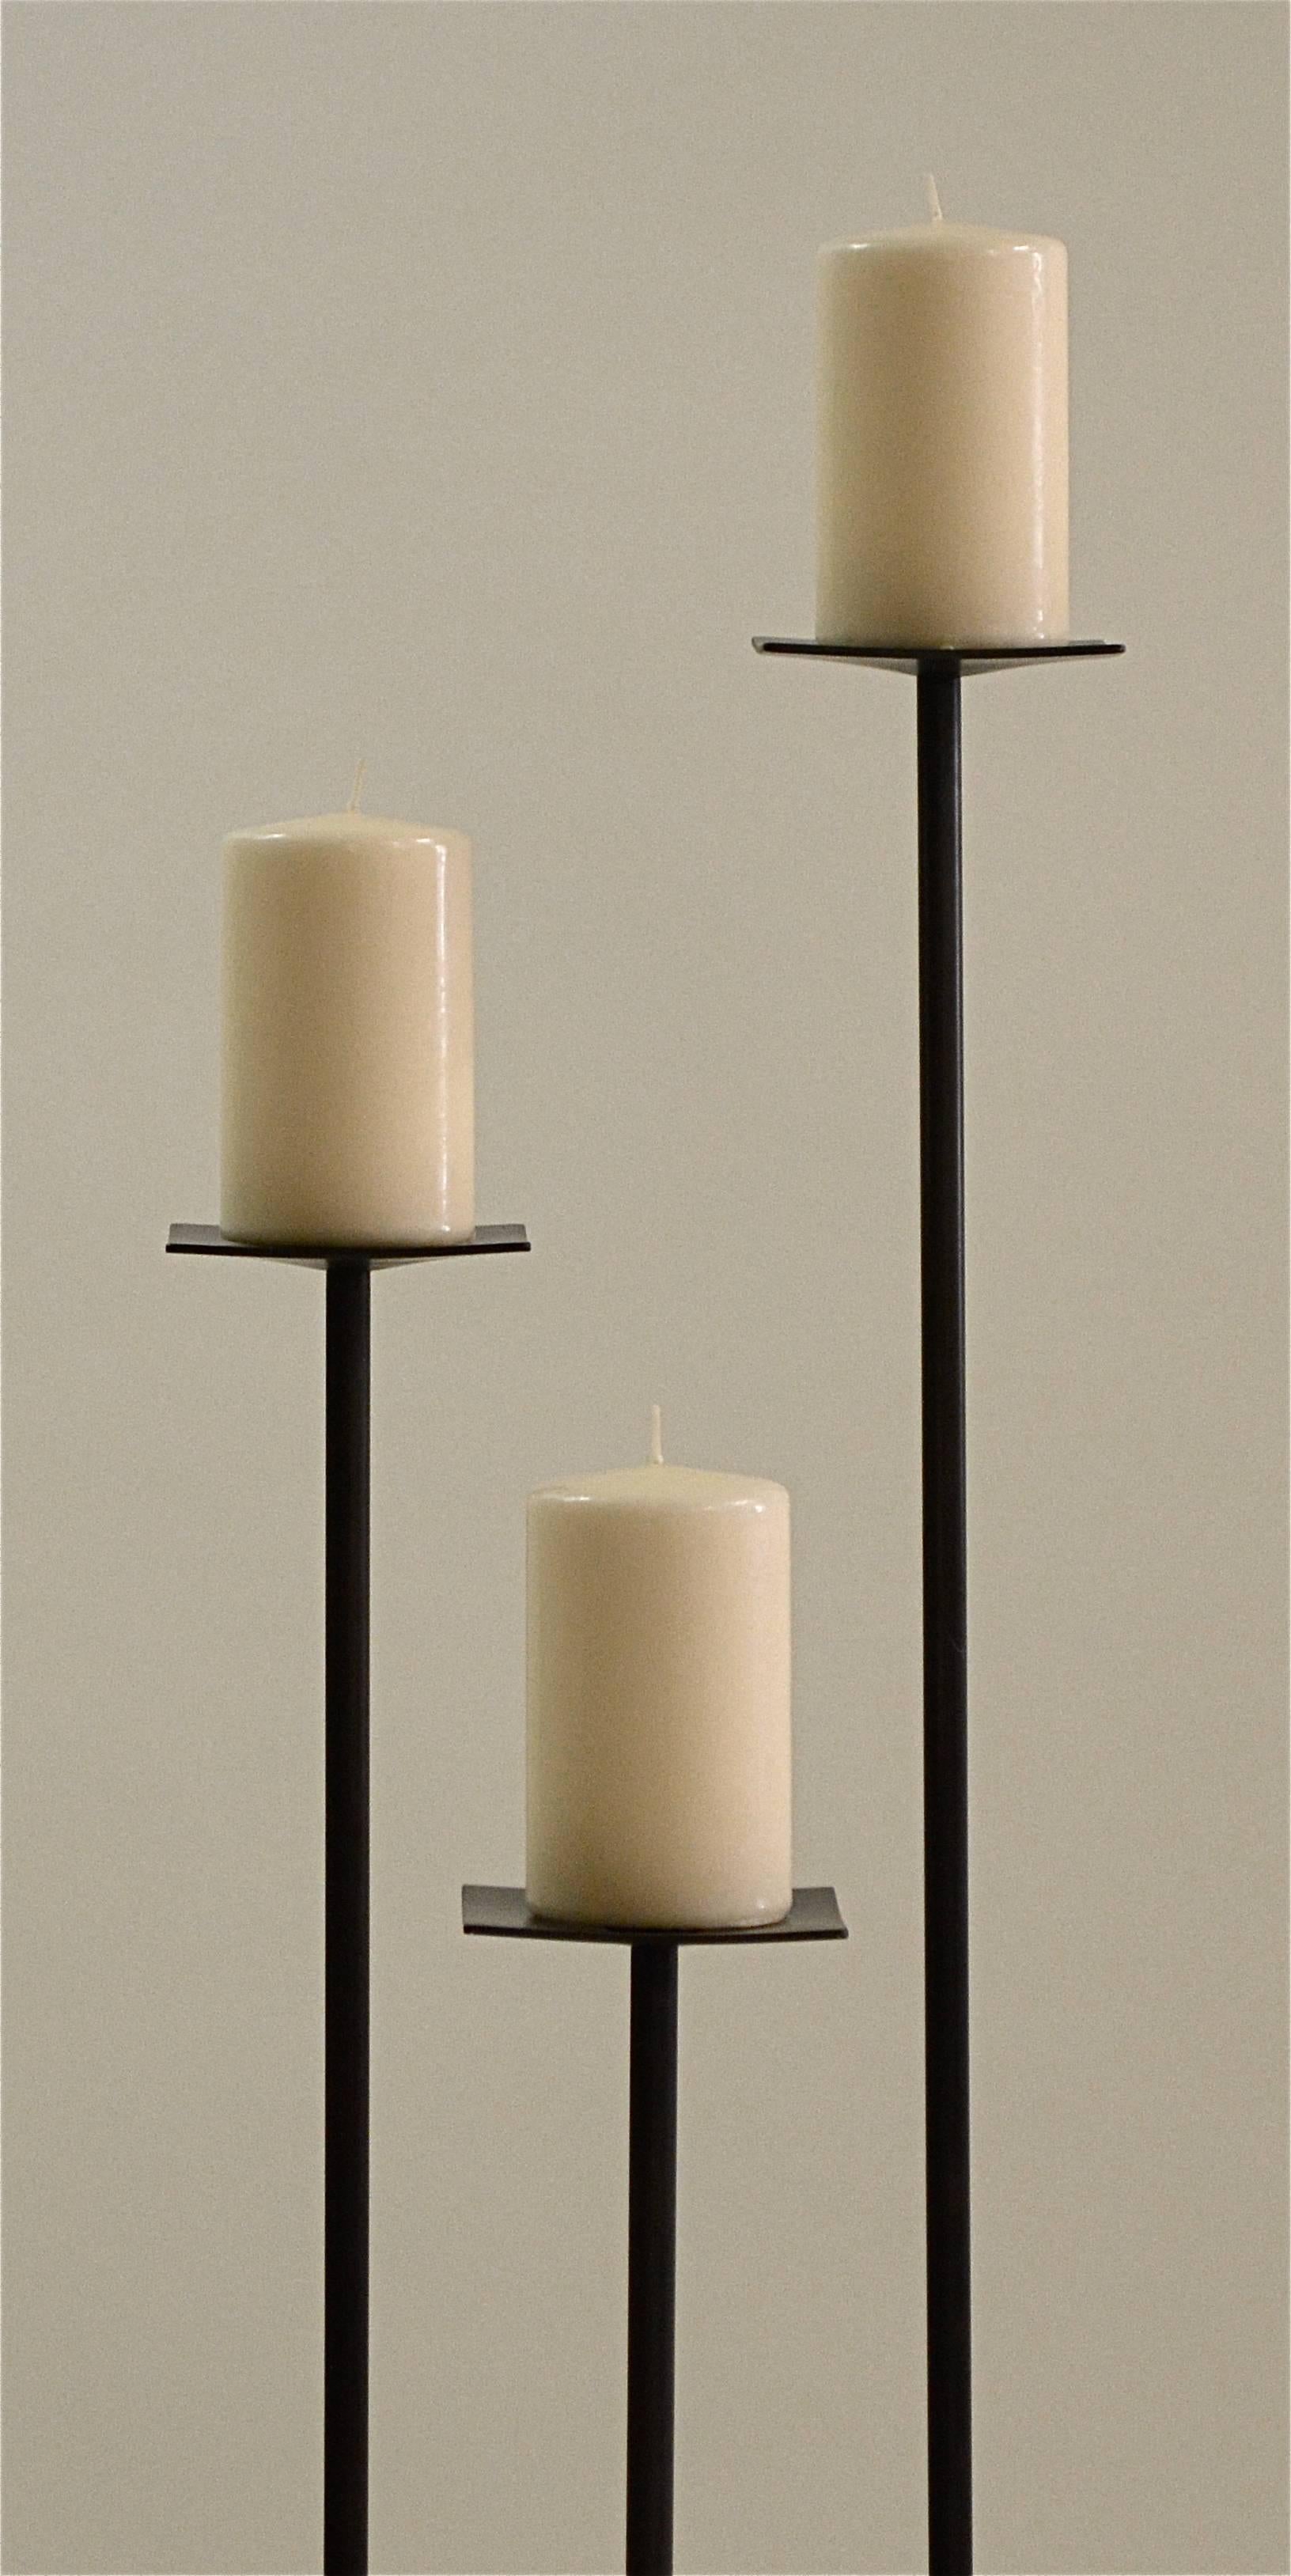 The Troika Candleholder, an original design offered exclusively by Vermontica, is designed and produced in Vermont by Scott Gordon. The troika candleholder is a trio of candleholders in varying heights of 27